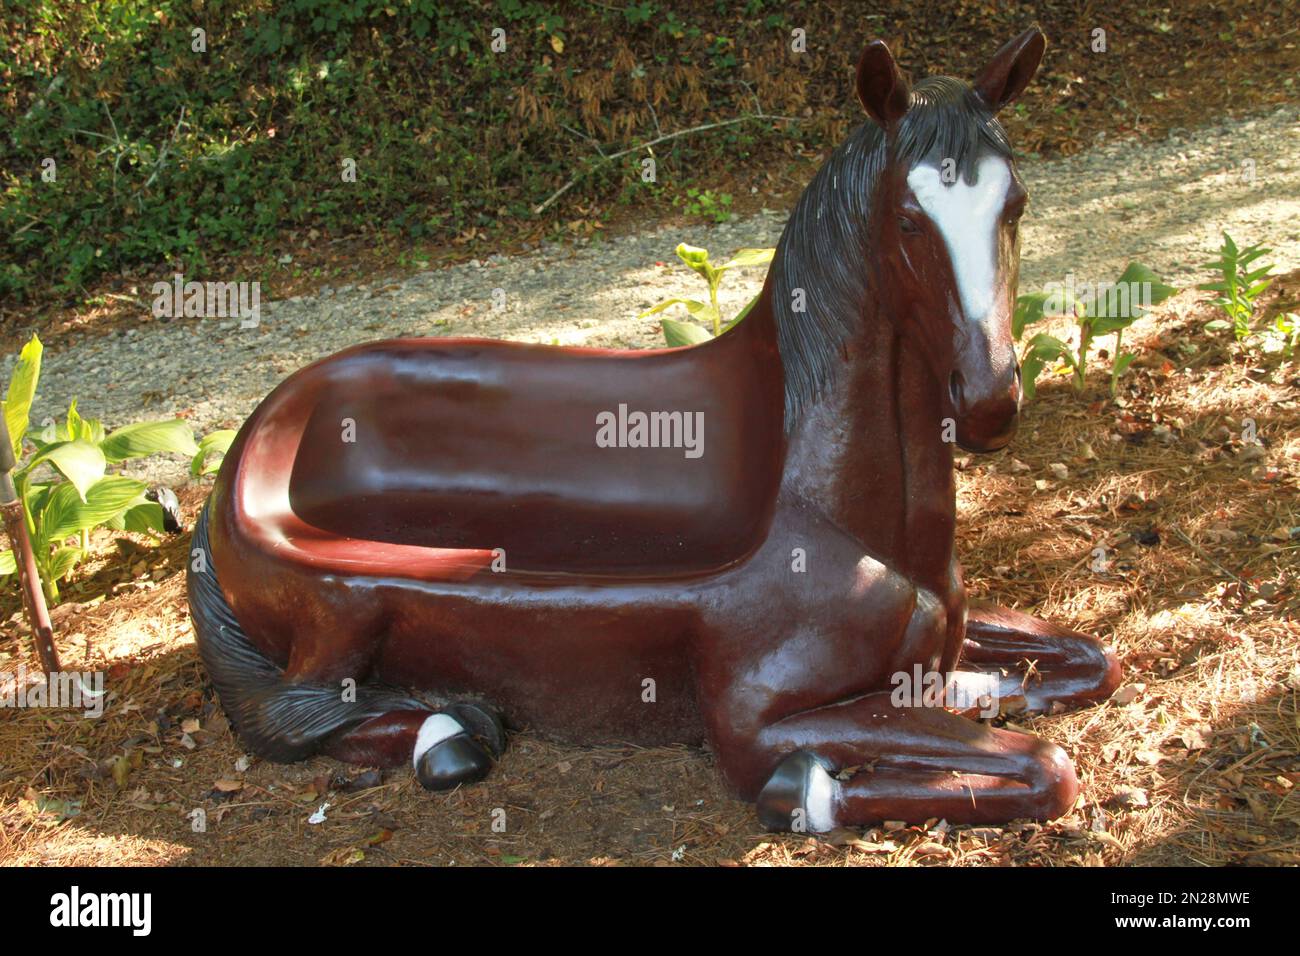 Bench in a park in the form of a horse Stock Photo